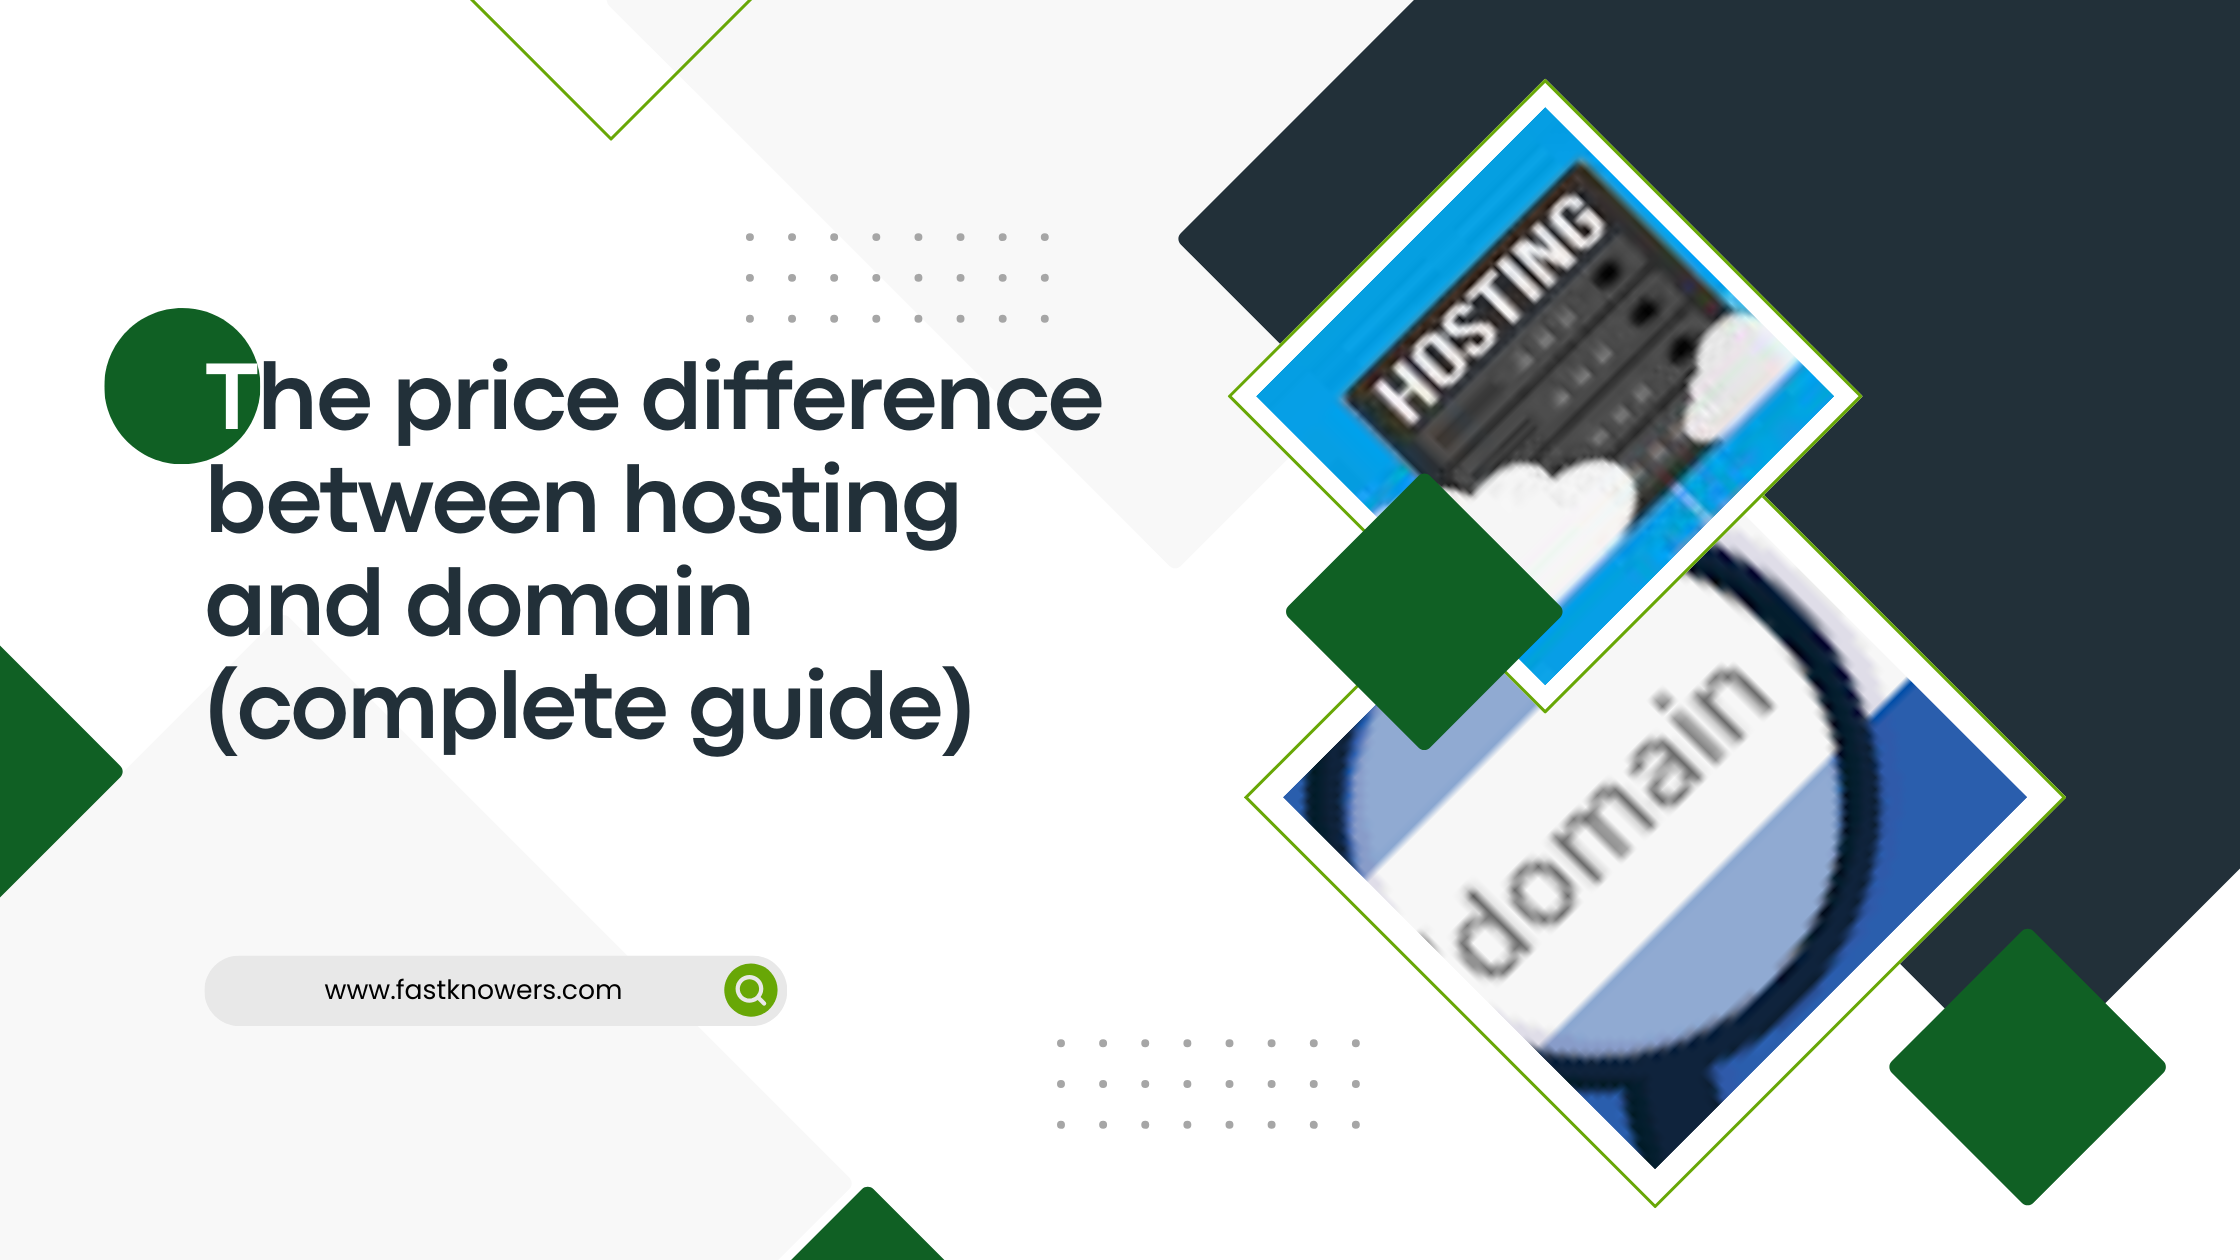 The price difference between hosting and domain (complete guide)